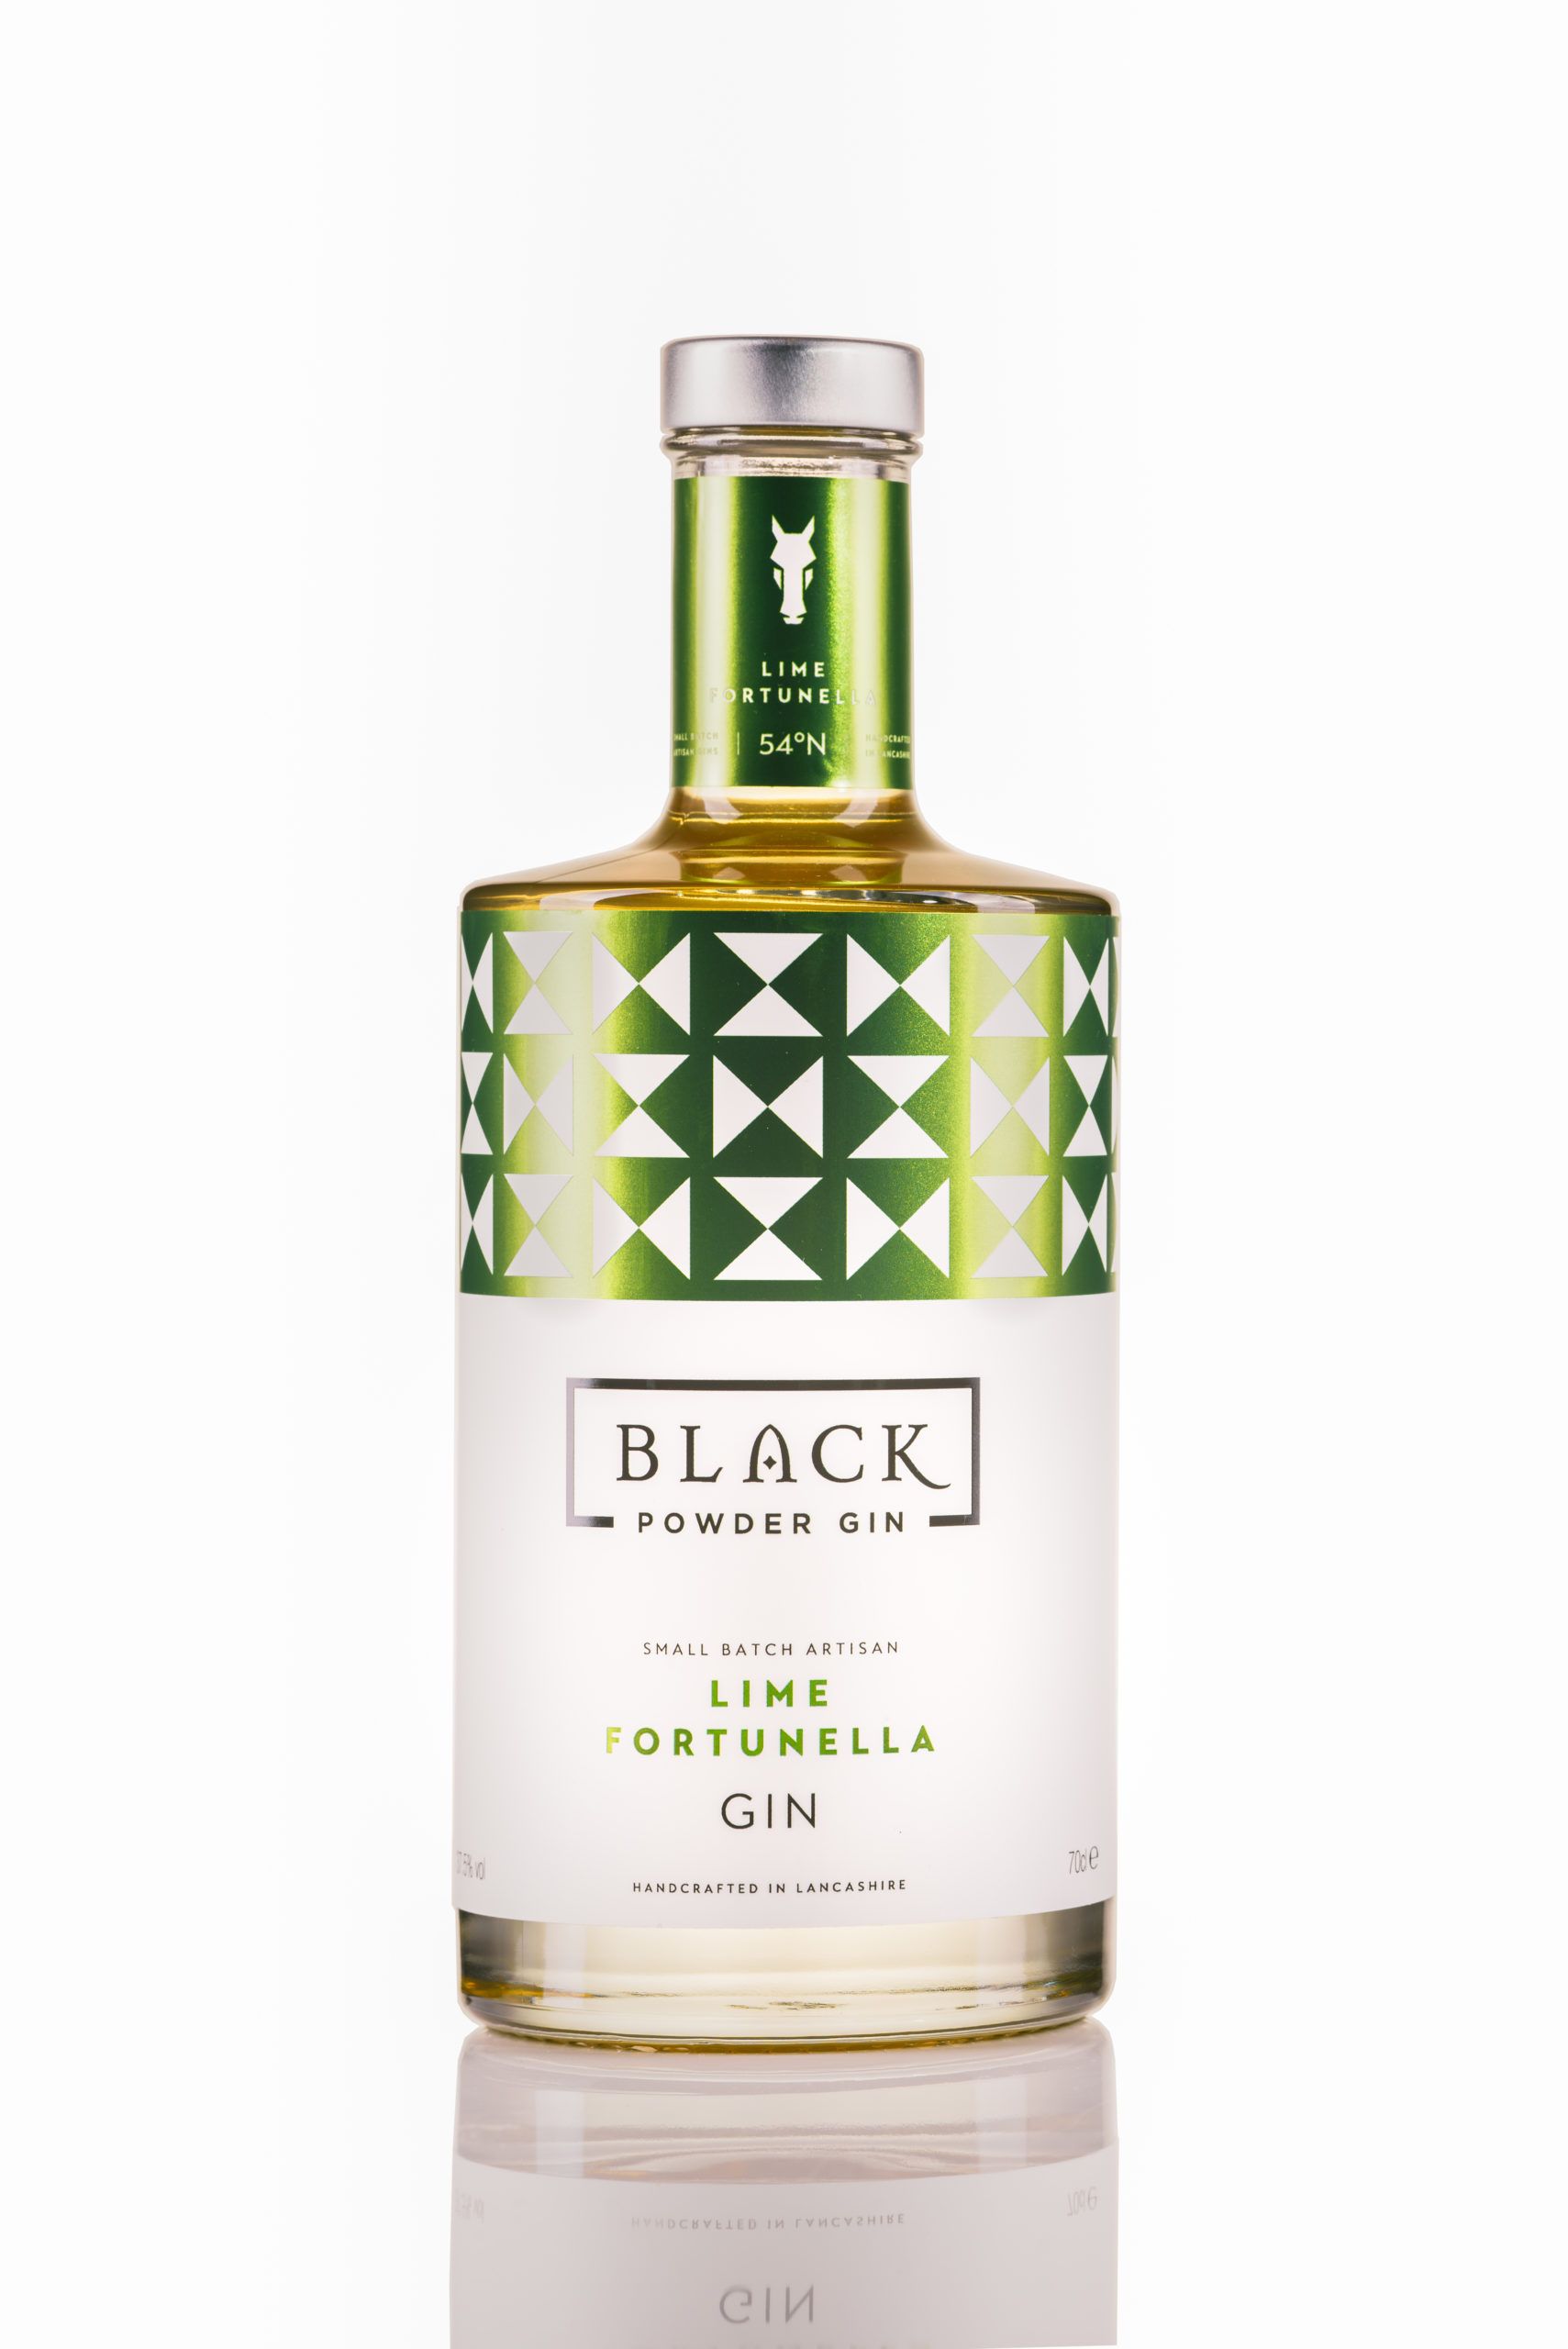 Black Powder Gin – Lime Fortunella | The Gin To My Tonic